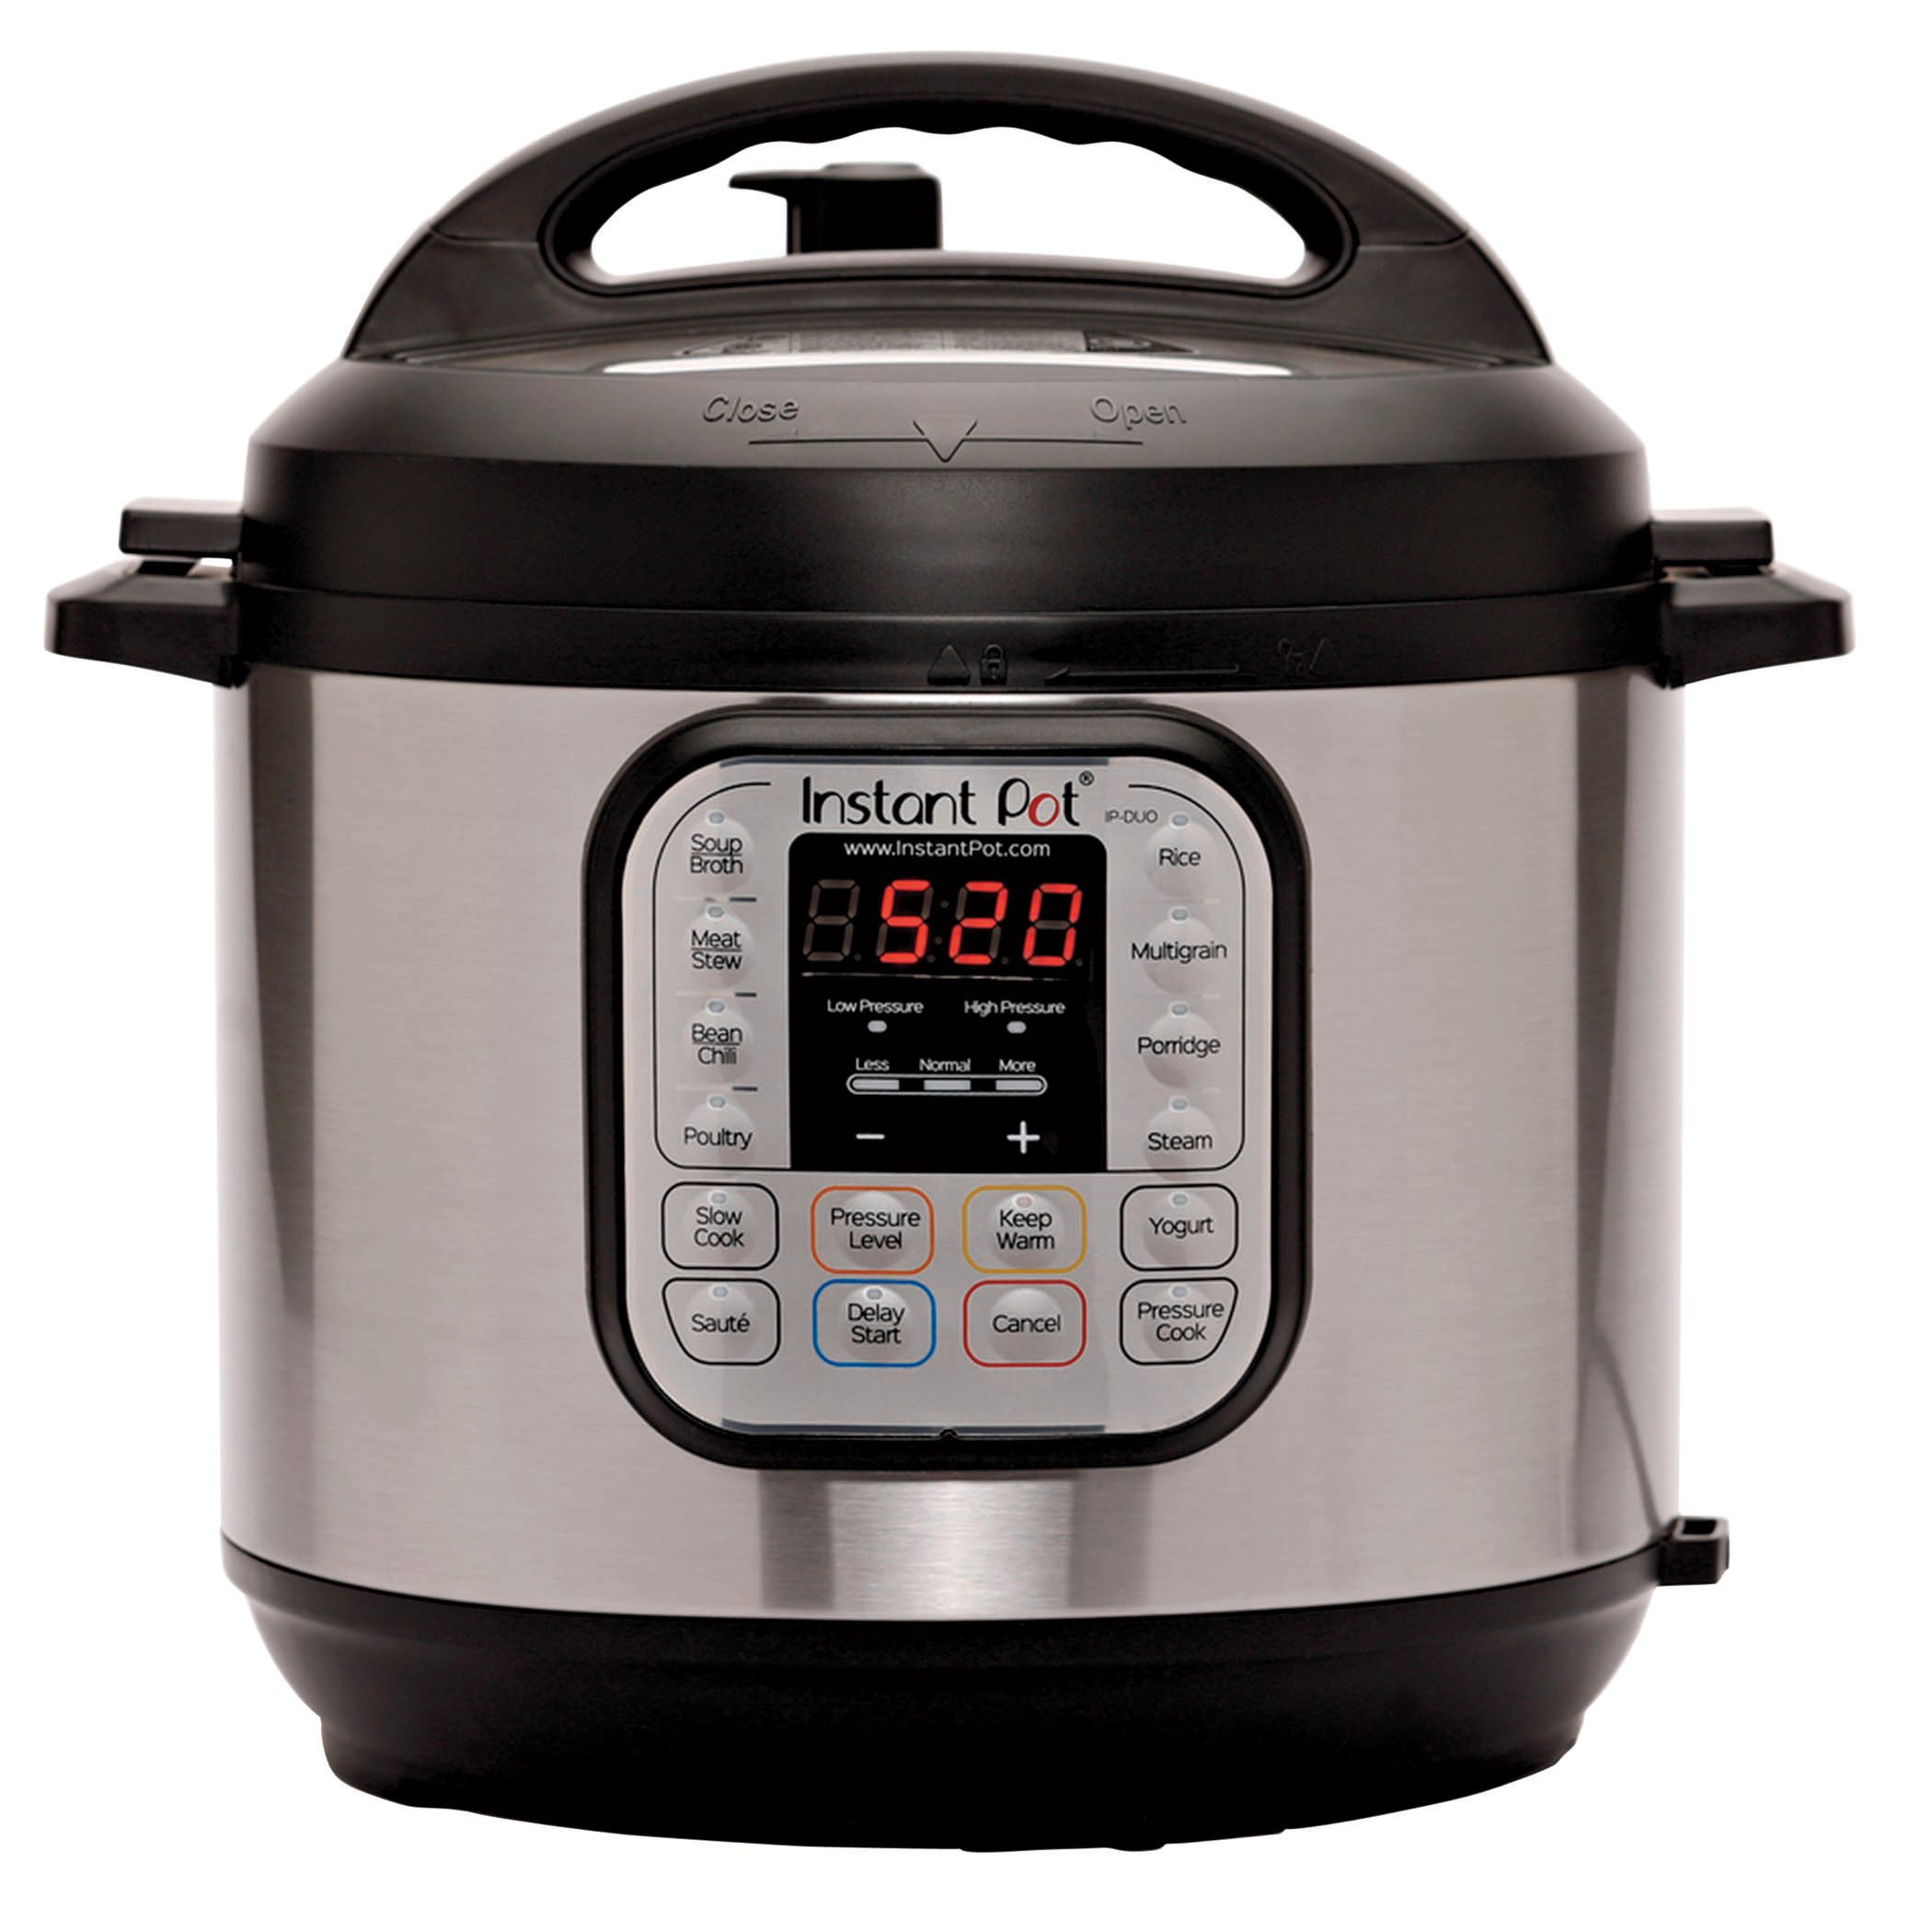 Instant Pot IP-DUO60 Stainless Steel 6-Quart Multi-Functional Pressure Cooker 